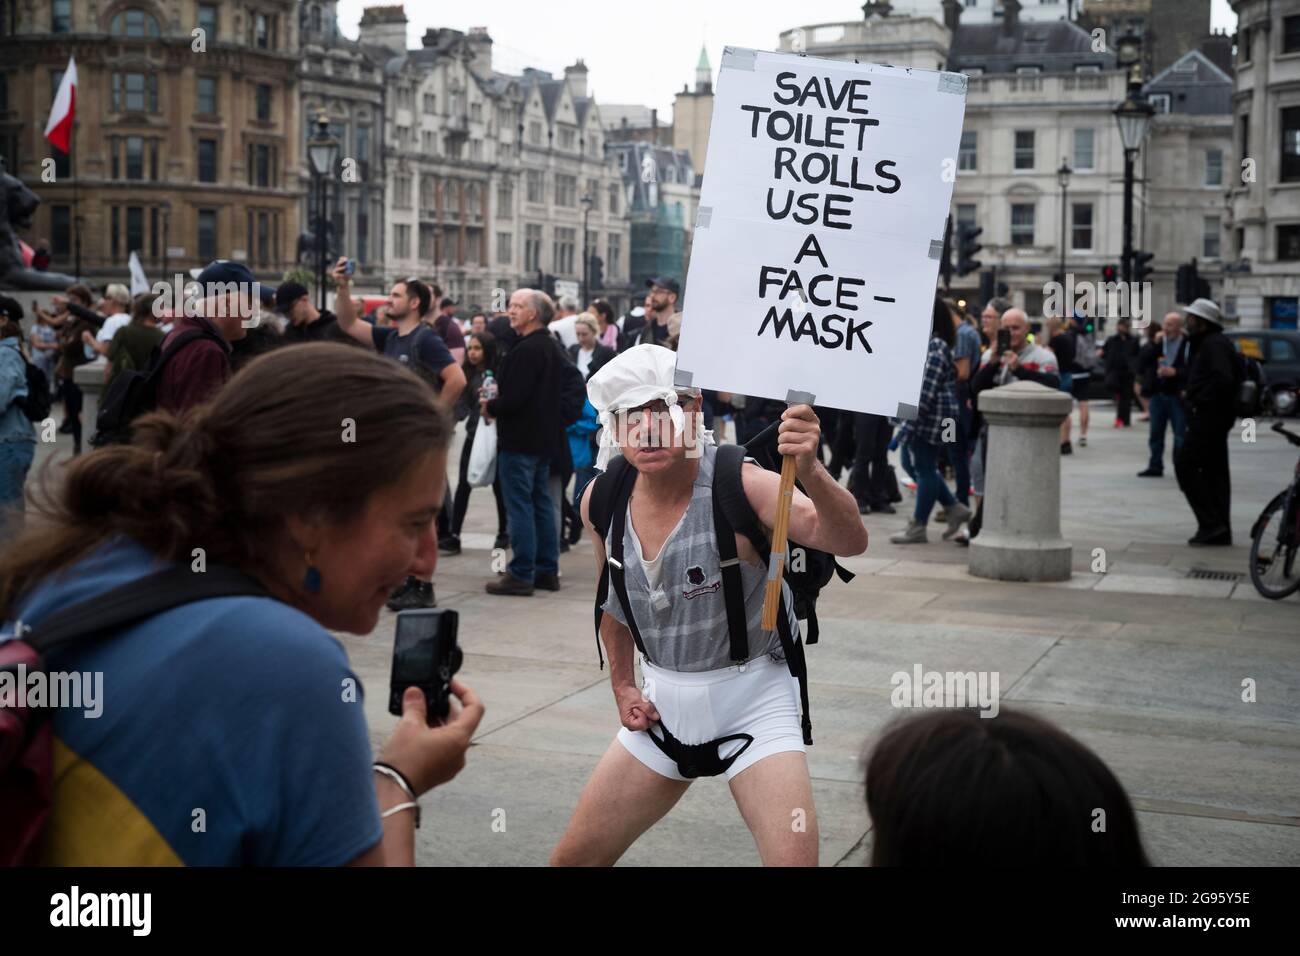 London, England, 24 July, 2021. Protesters gather on London’s Trafalgar Square in order to protest government’s past lockdown policies, demanding immediate cancellation of all measures preventing further outbreaks of COVID19. Credit: Bruno Korbar / Alamy Stock Photo